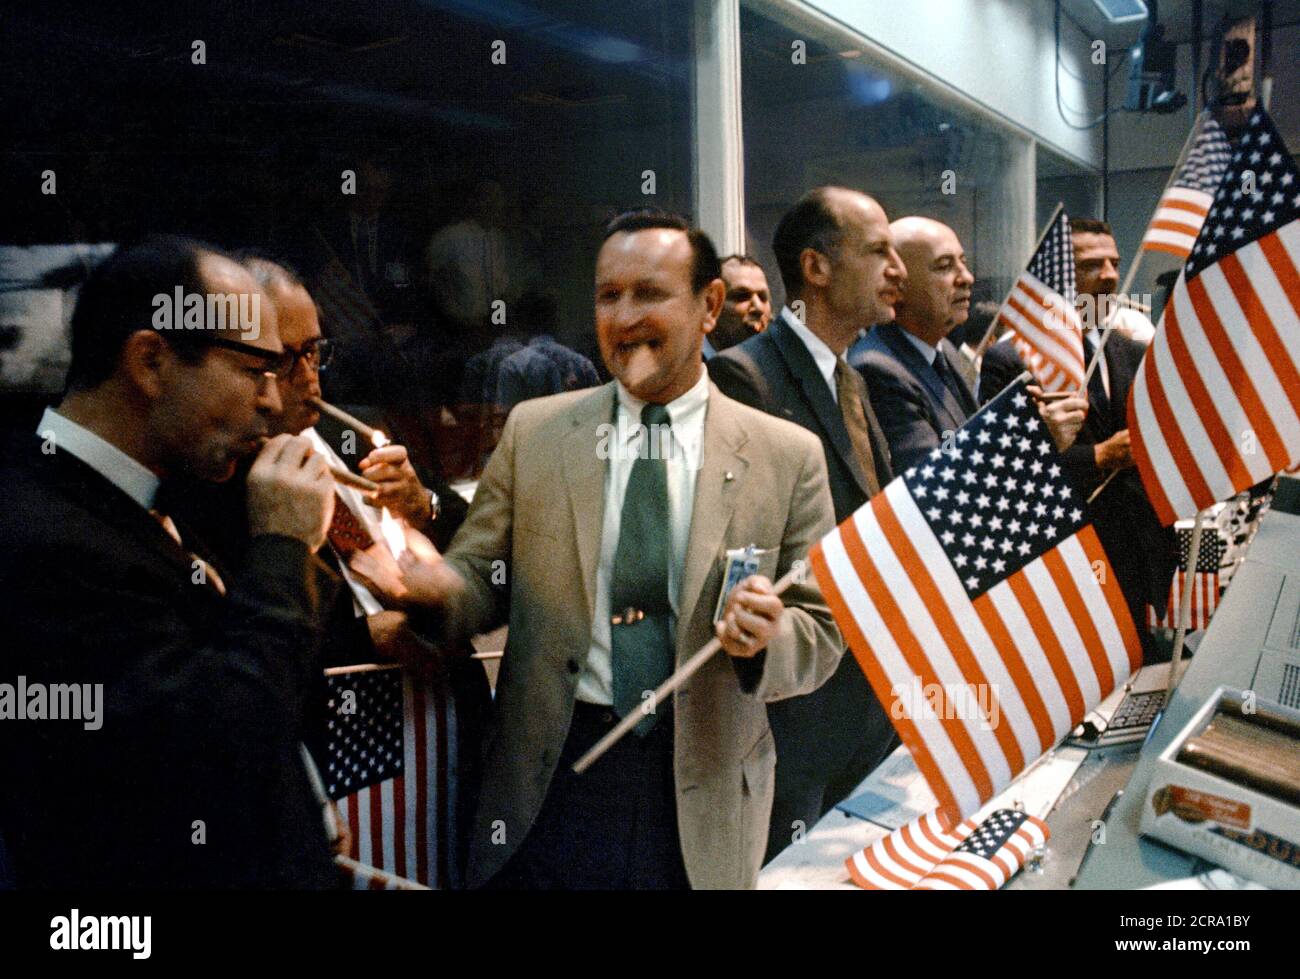 NASA and Manned Spacecraft Center officials join w flight controllers in the Mission Operations Control Room in celebrating the successful conclusion of the Apollo 11 lunar landing mission. Stock Photo